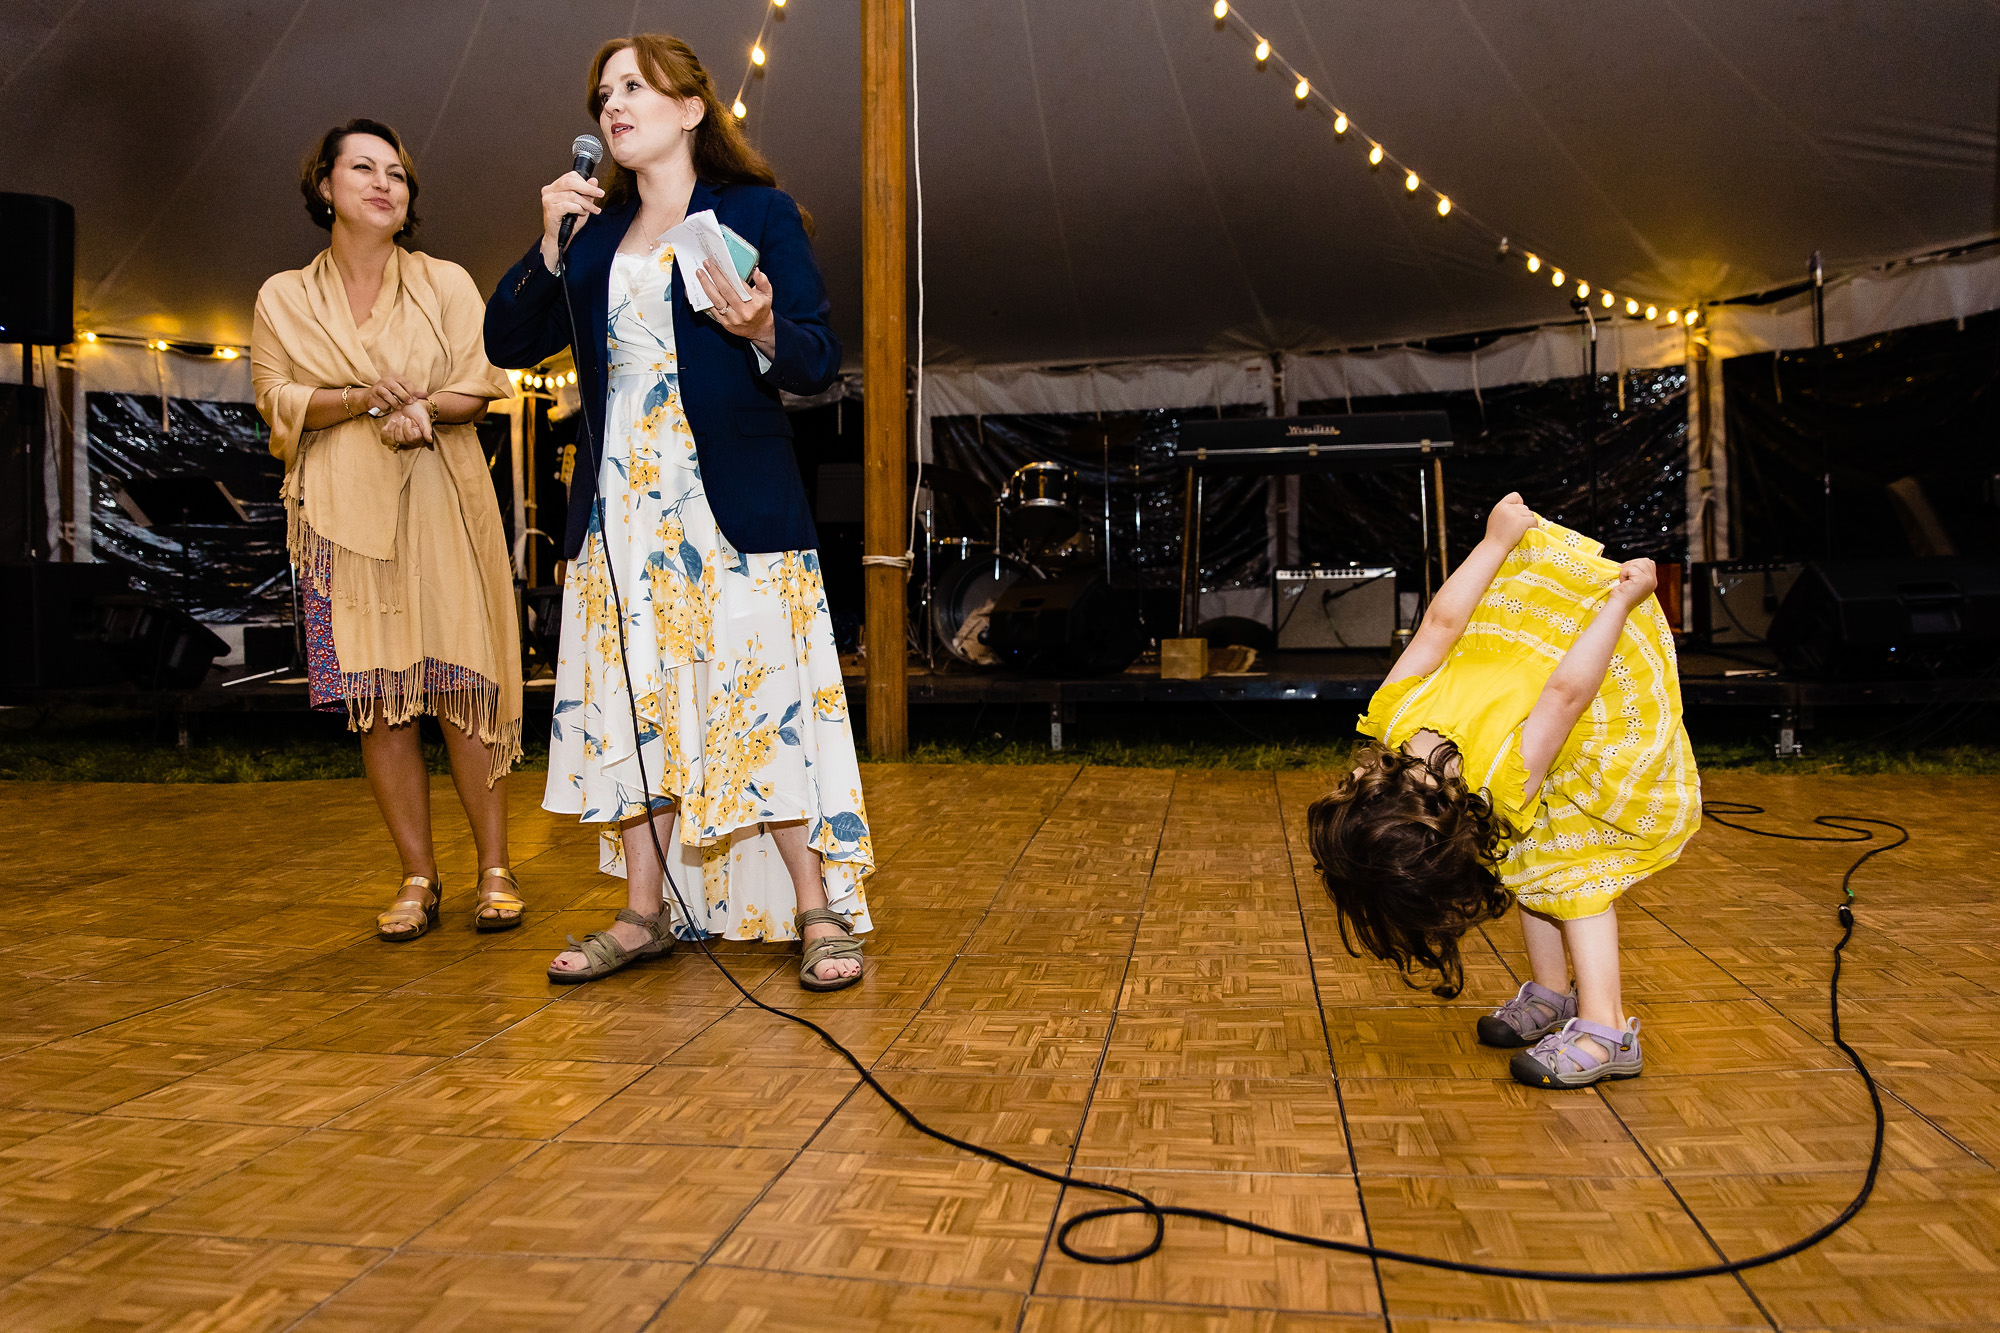 A flower girl clowns around while a toast is given at a wedding.